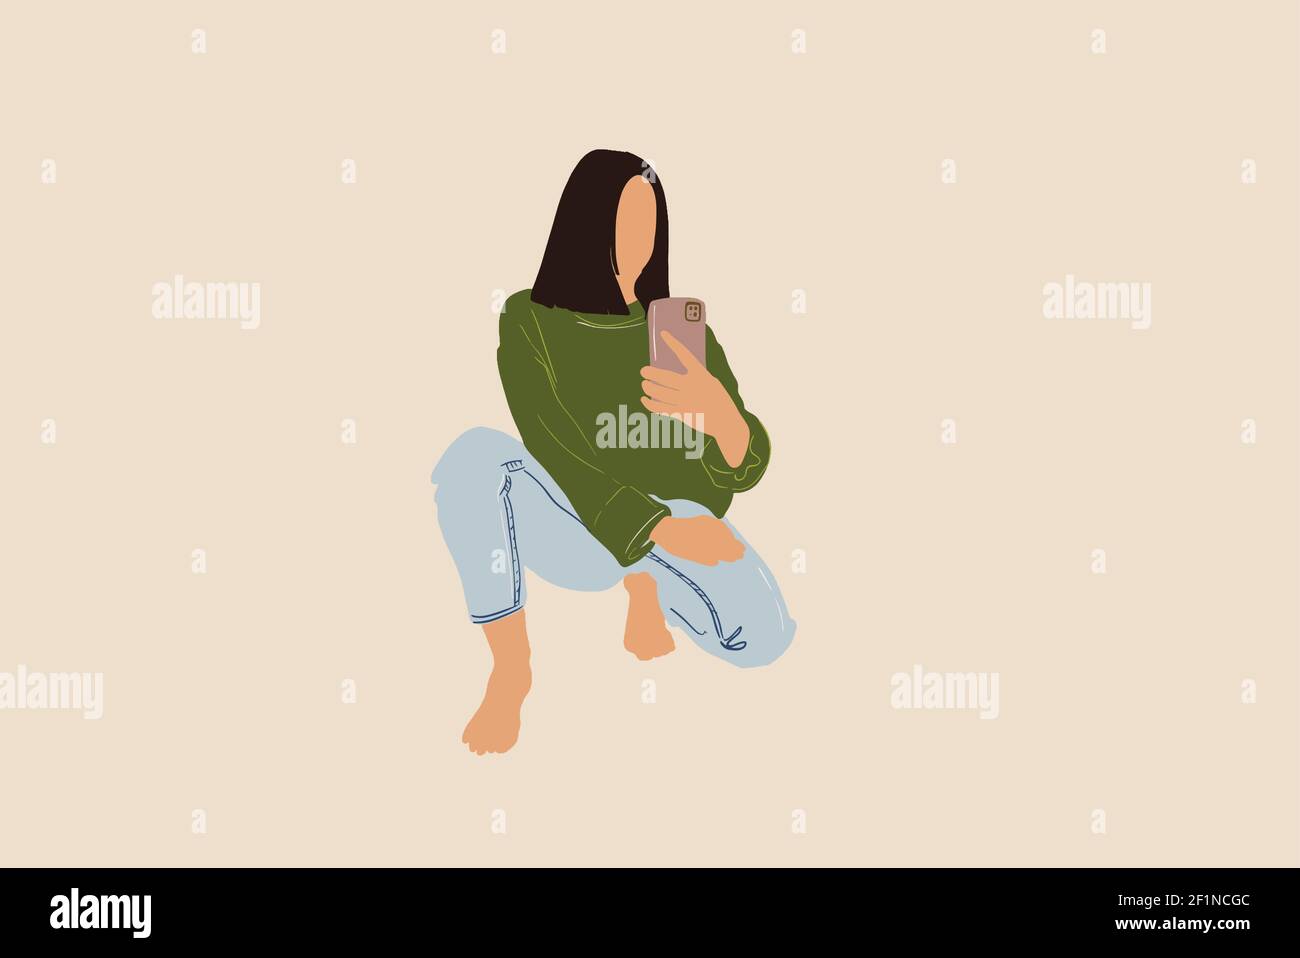 Woman in green sweater and blue jeans sitting squatting and takes a selfie. Vector illustration in flat style and pastel tones. Stock Vector